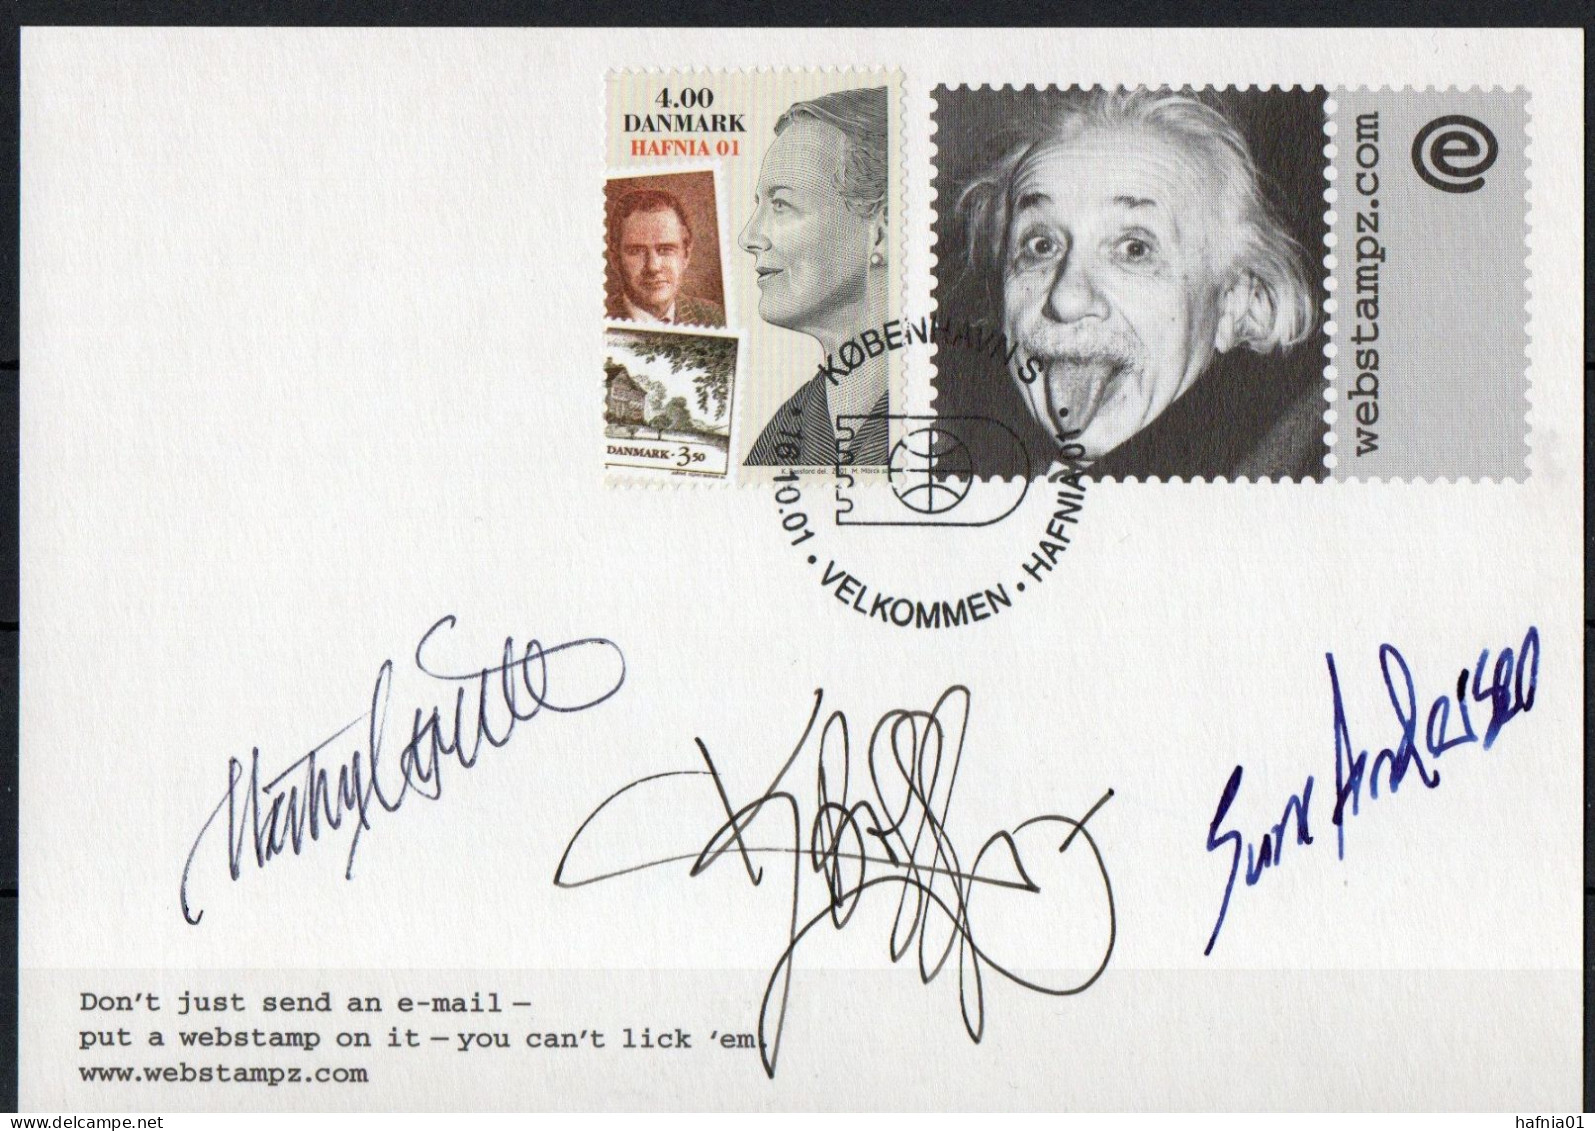 Martin Mörck. Denmark 2001. 150 Anniv Danish Stamps. Michel 1287on Card. Special Cancel. Signed. - Covers & Documents